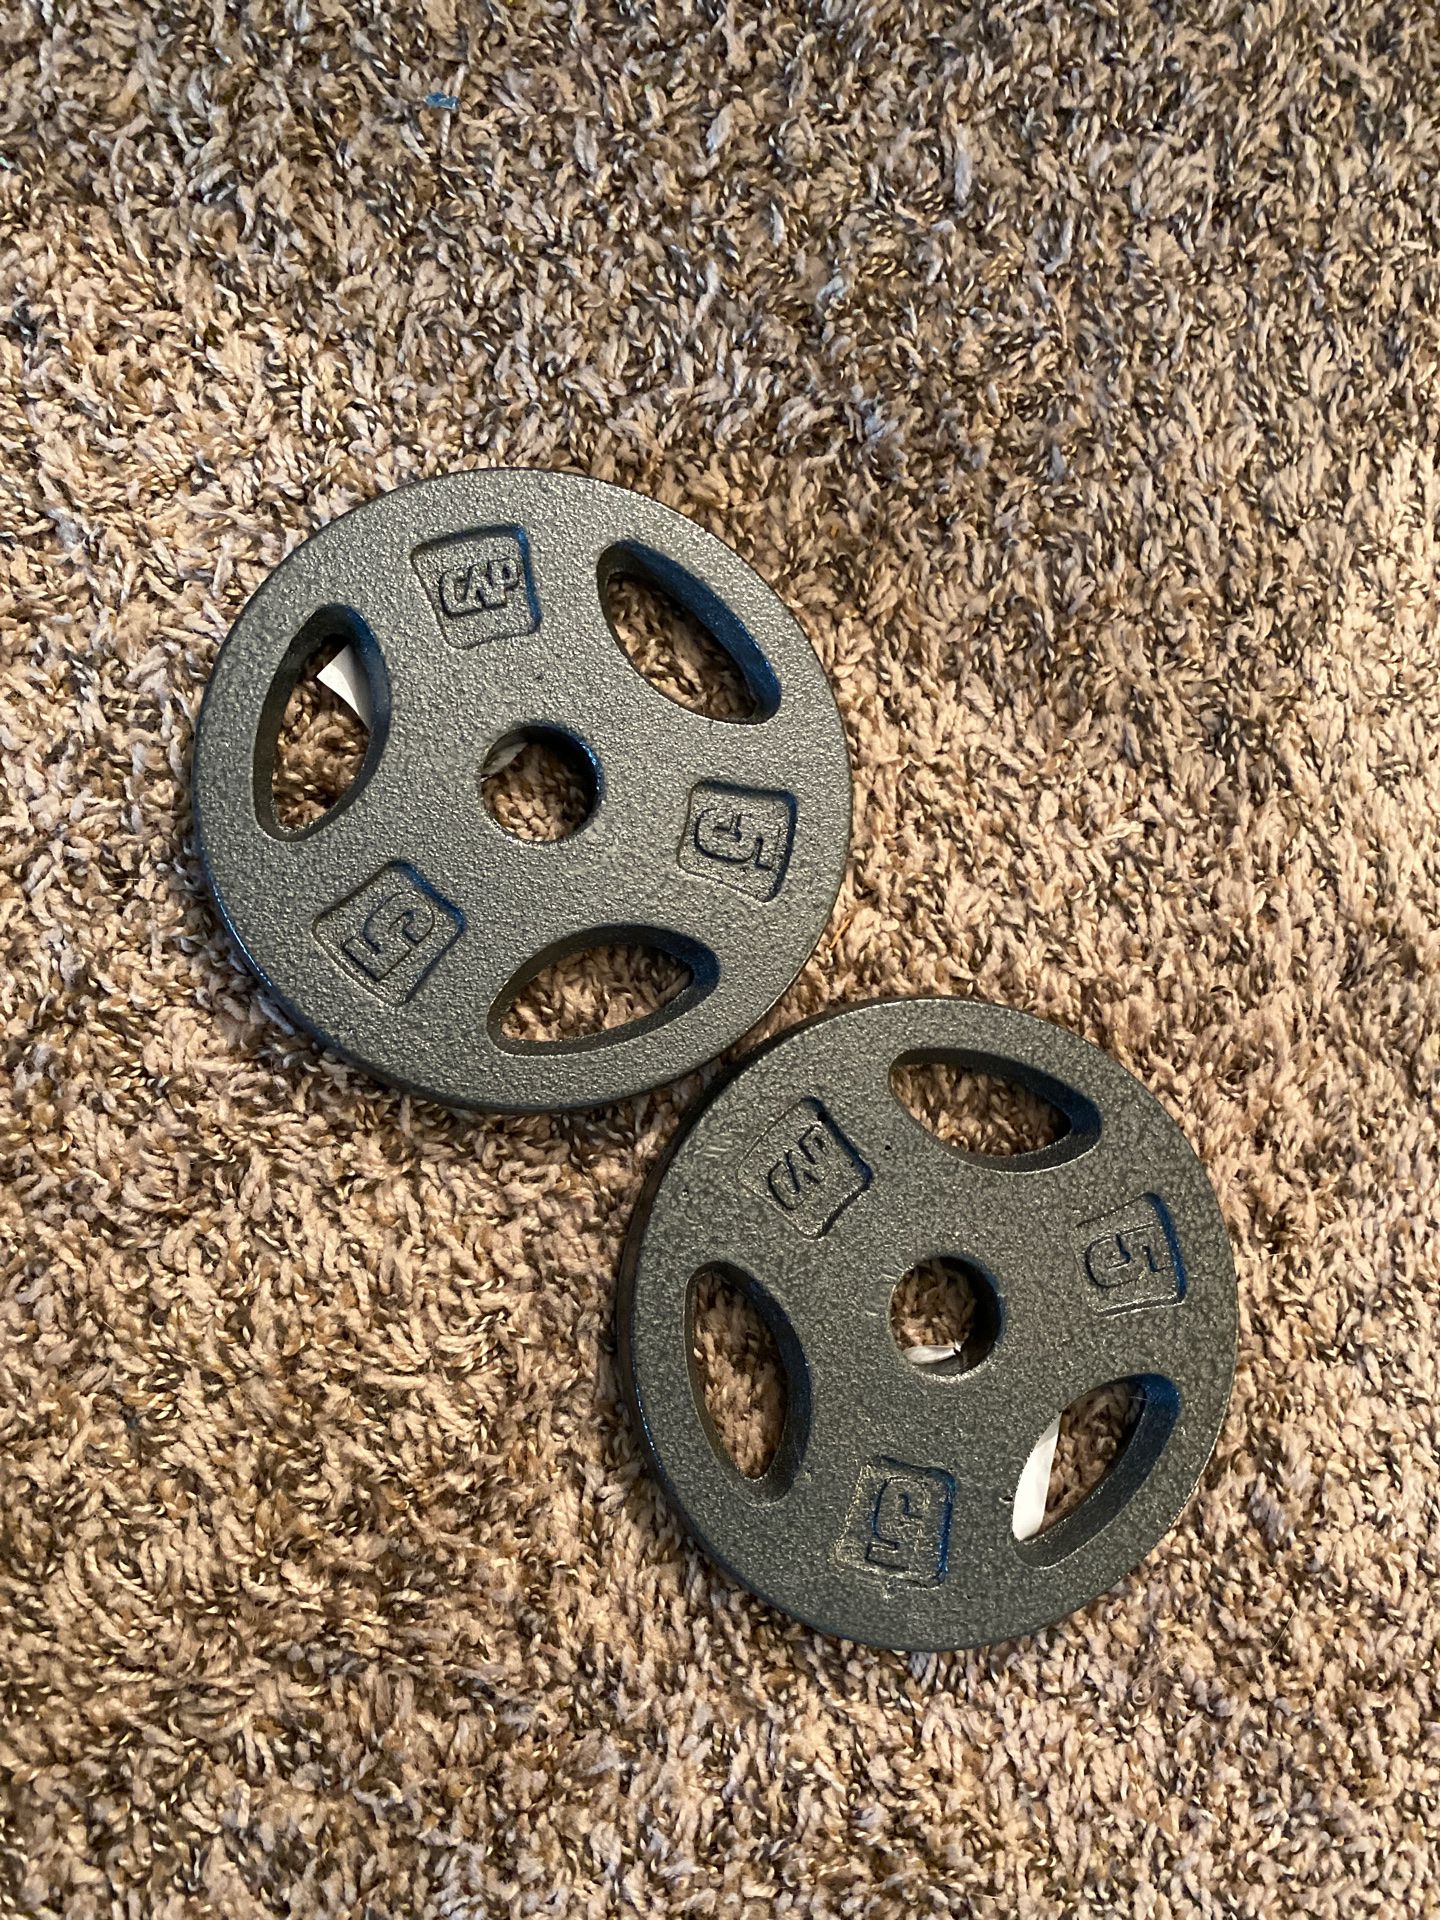 5lb plates weights